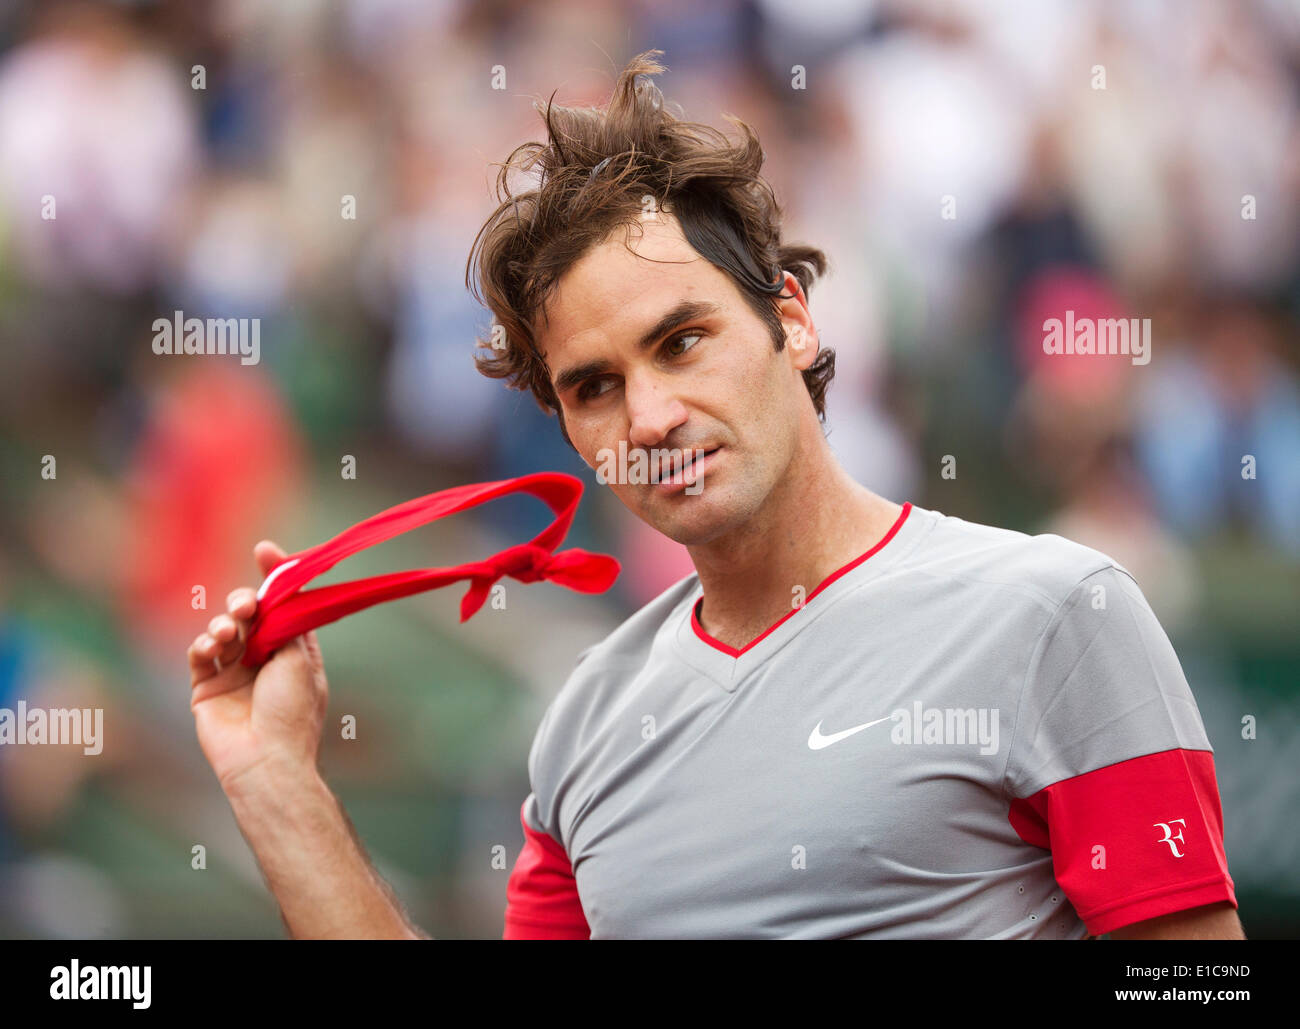 Paris, France. 30th May 2014. Tennis, French Open, Roland Garros, Roger Federer (SUI) takes off his had band Photo:Tennisimages/Henk Koster/Alamy Live News Stock Photo